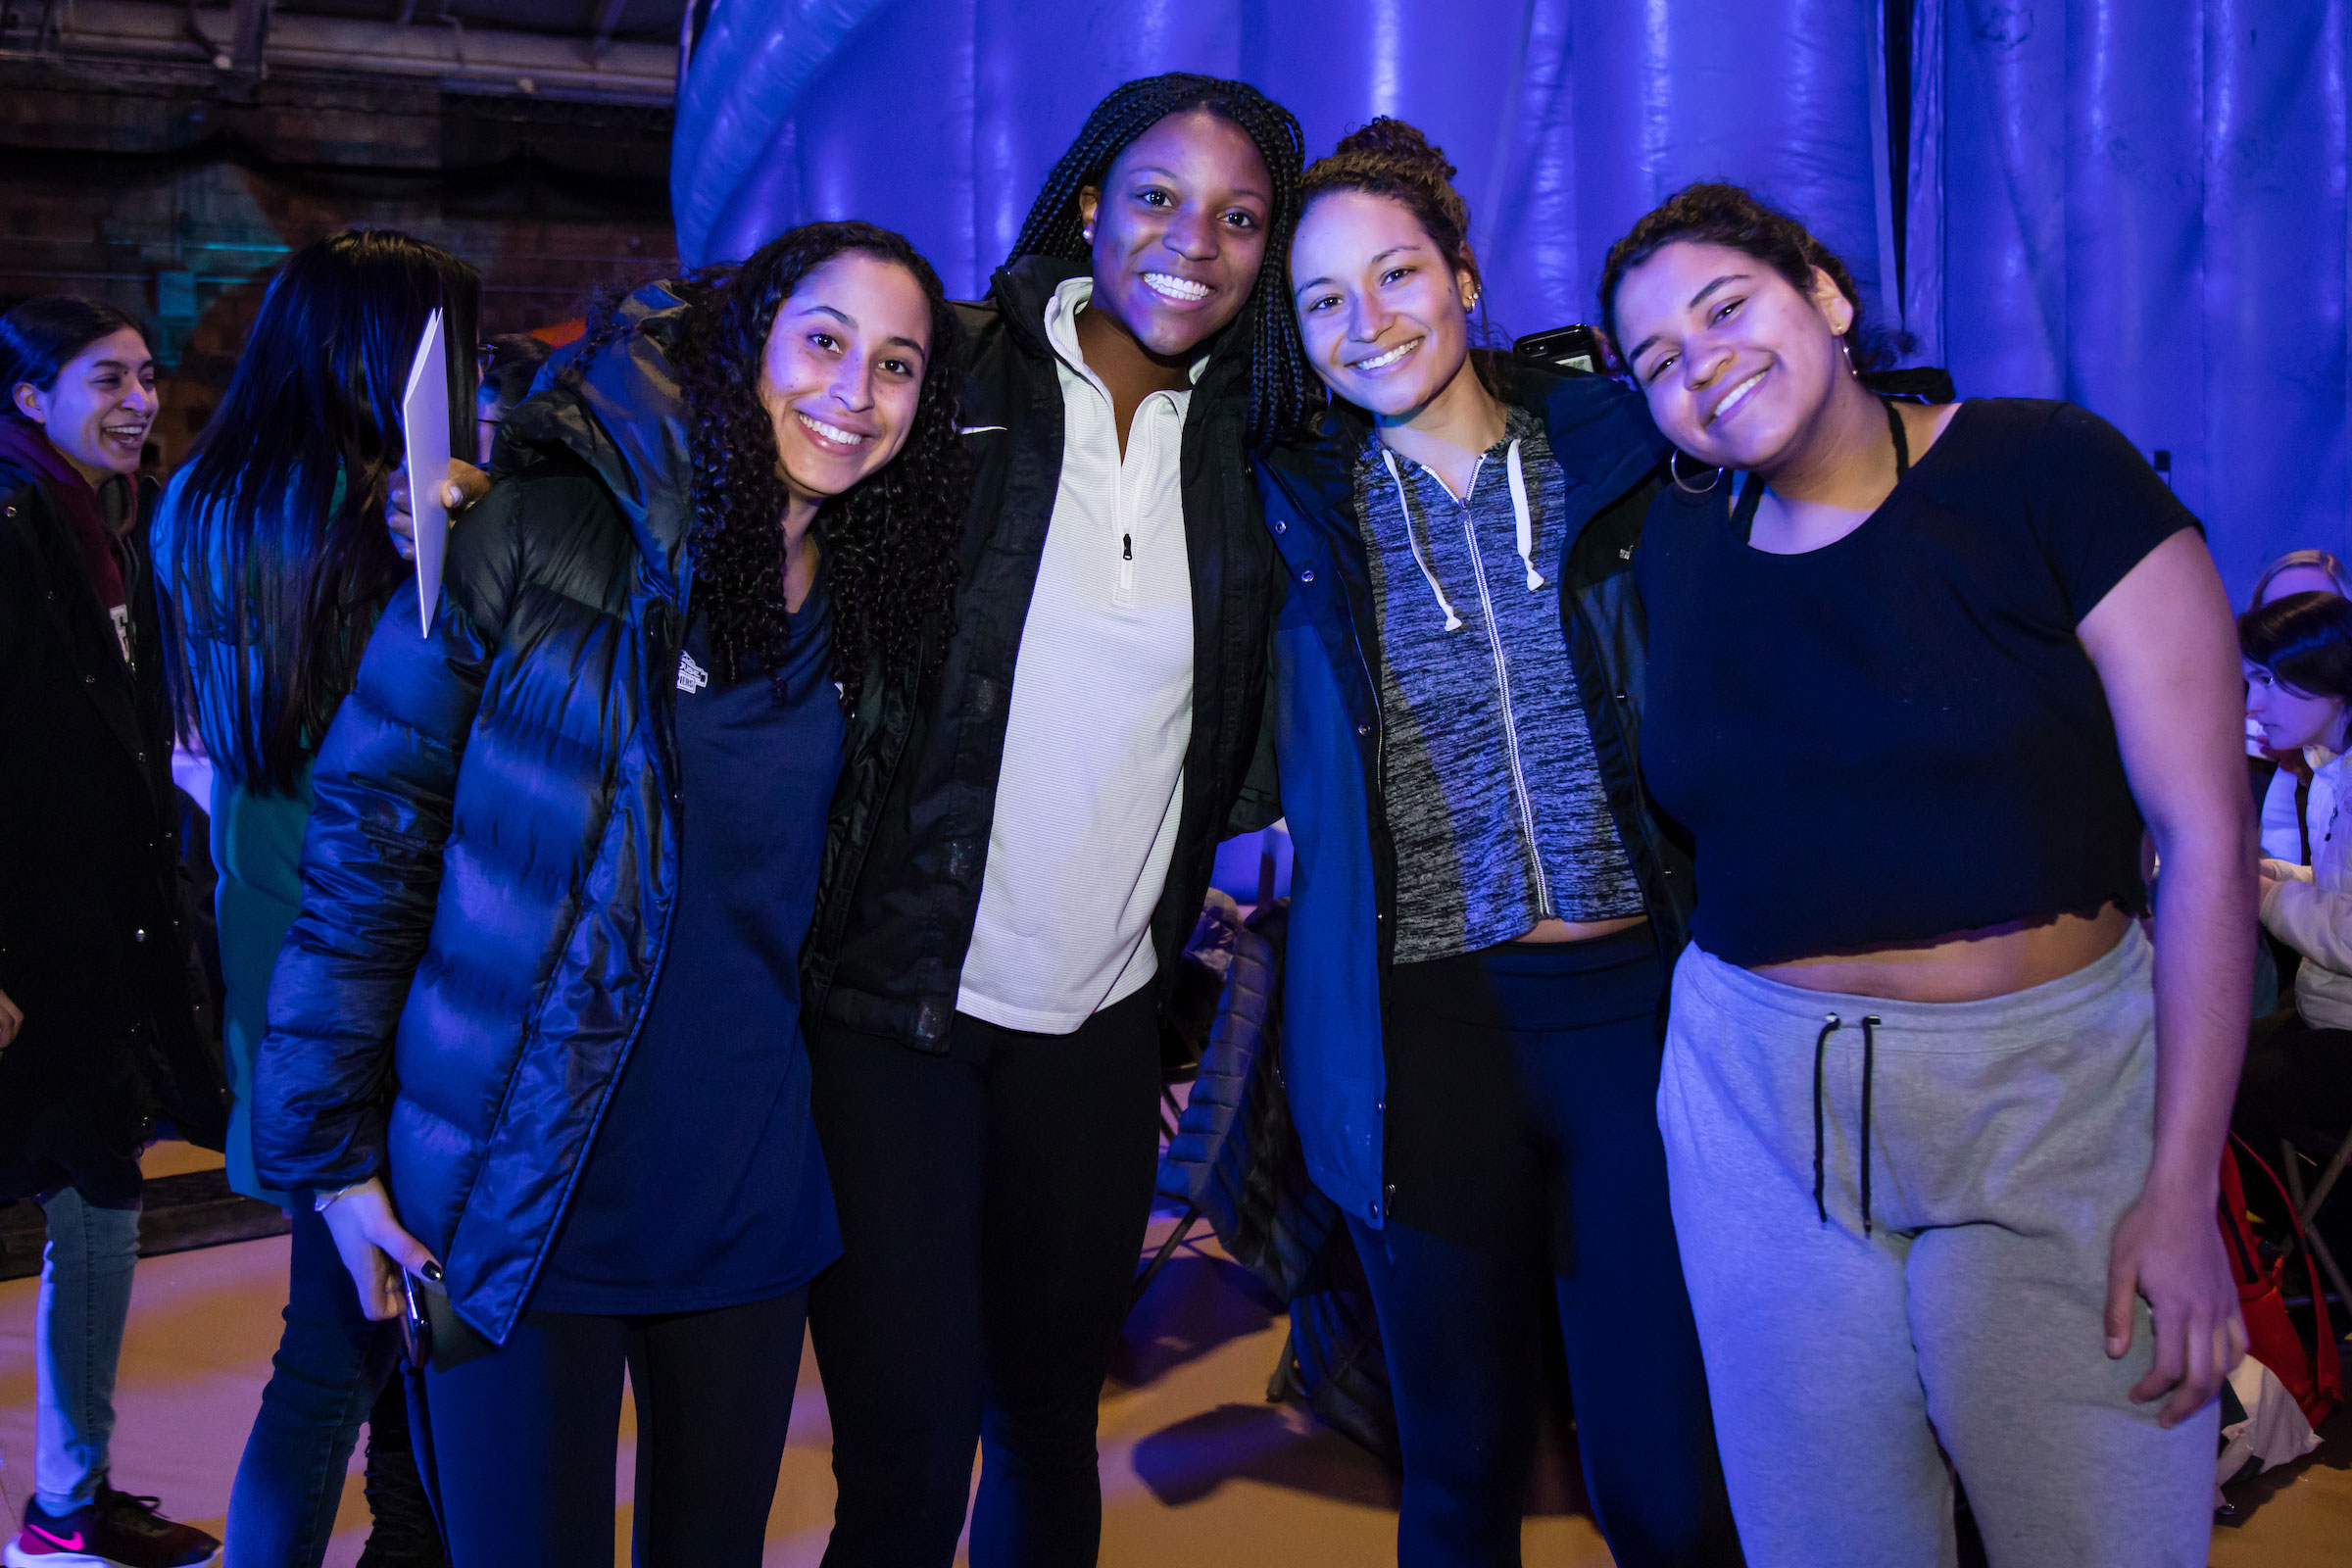 Four smiling women pose for the camera at Winter Fest